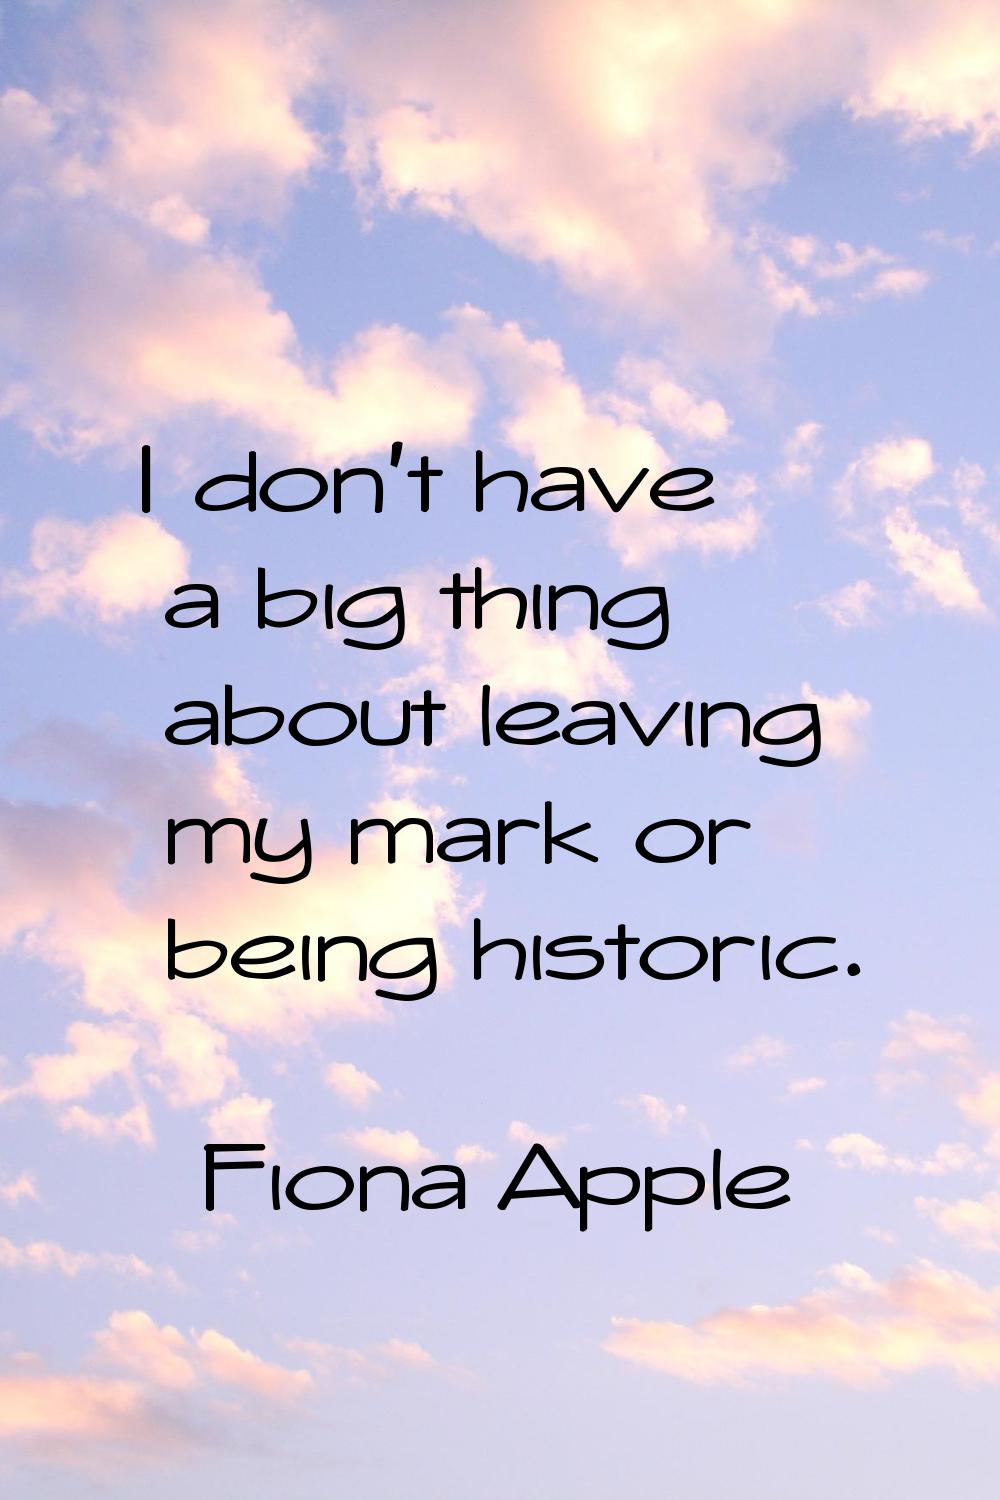 I don't have a big thing about leaving my mark or being historic.